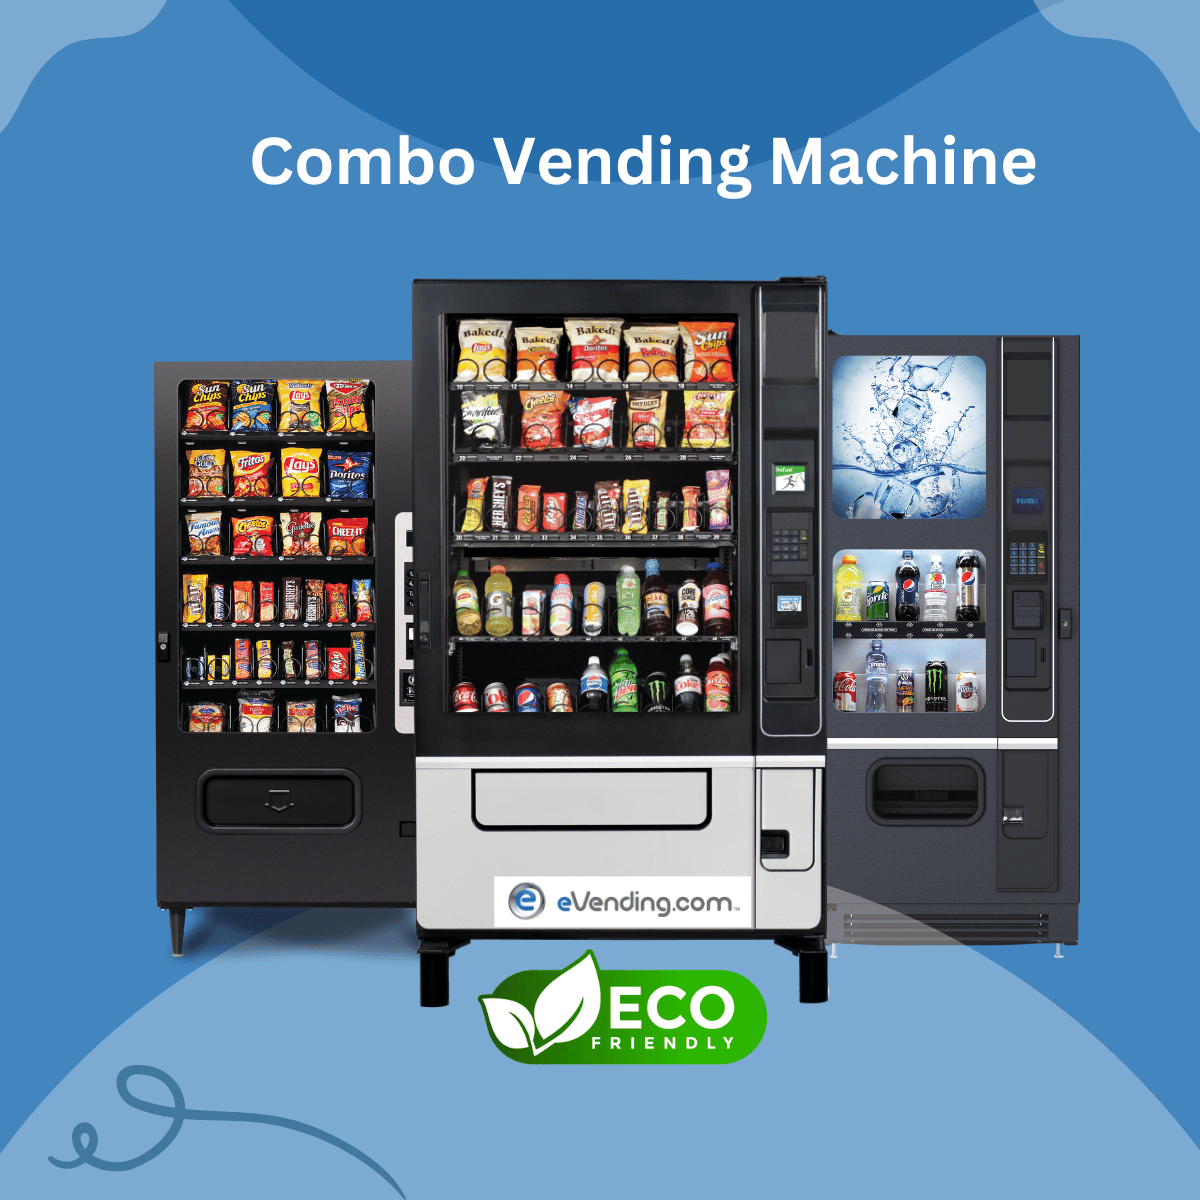 COMBO VENDING MACHINES PROVIDE THE BEST OF BOTH WORLDS